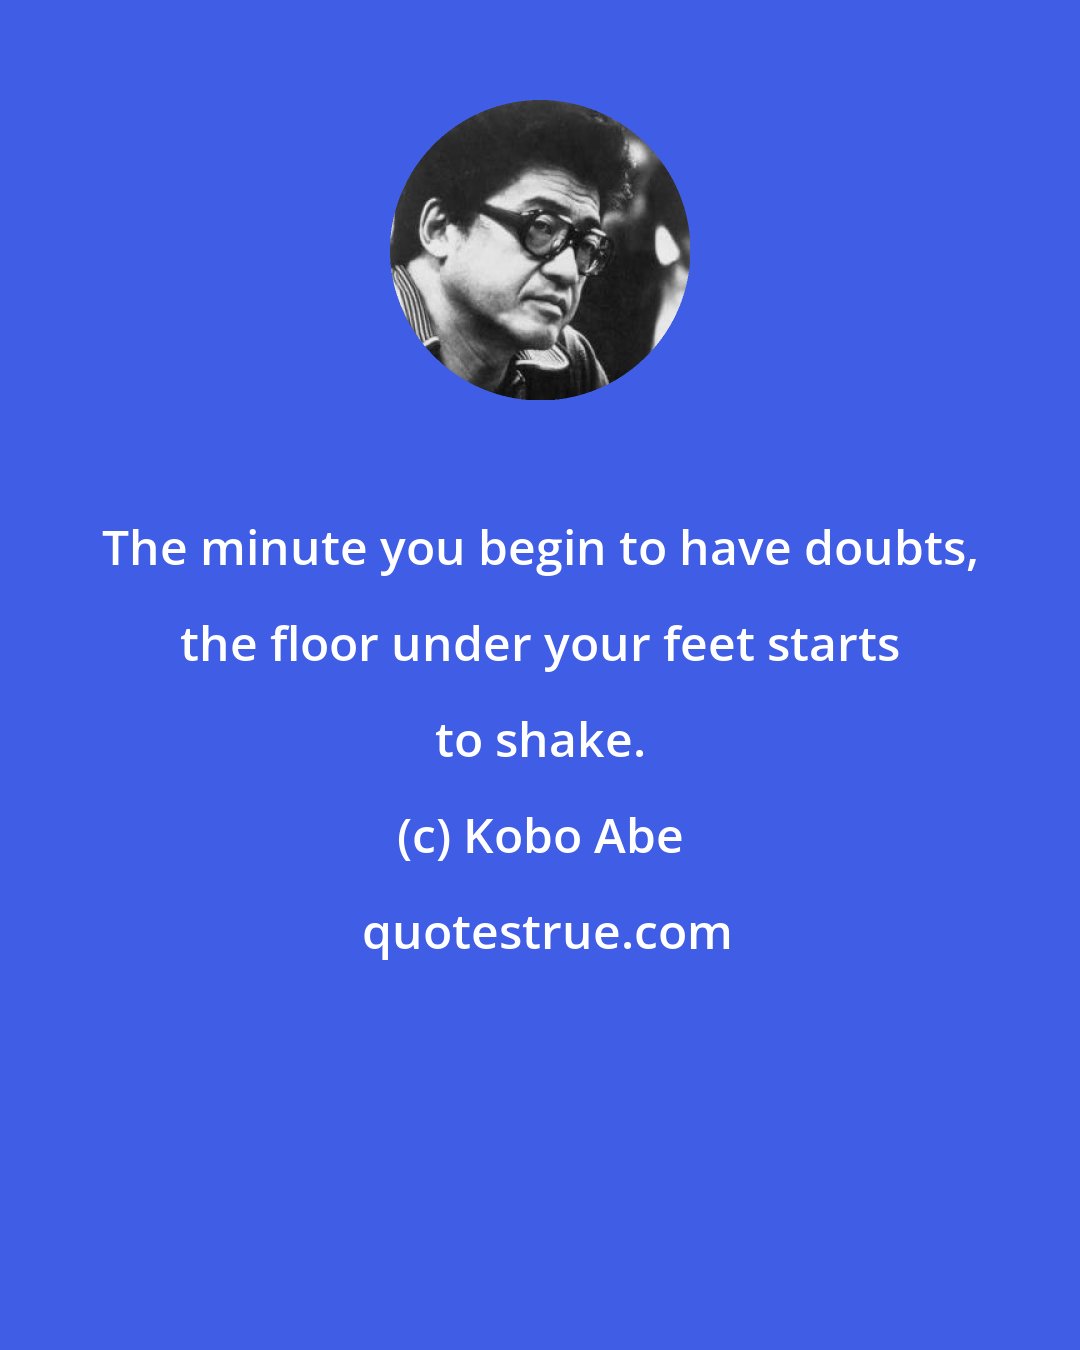 Kobo Abe: The minute you begin to have doubts, the floor under your feet starts to shake.